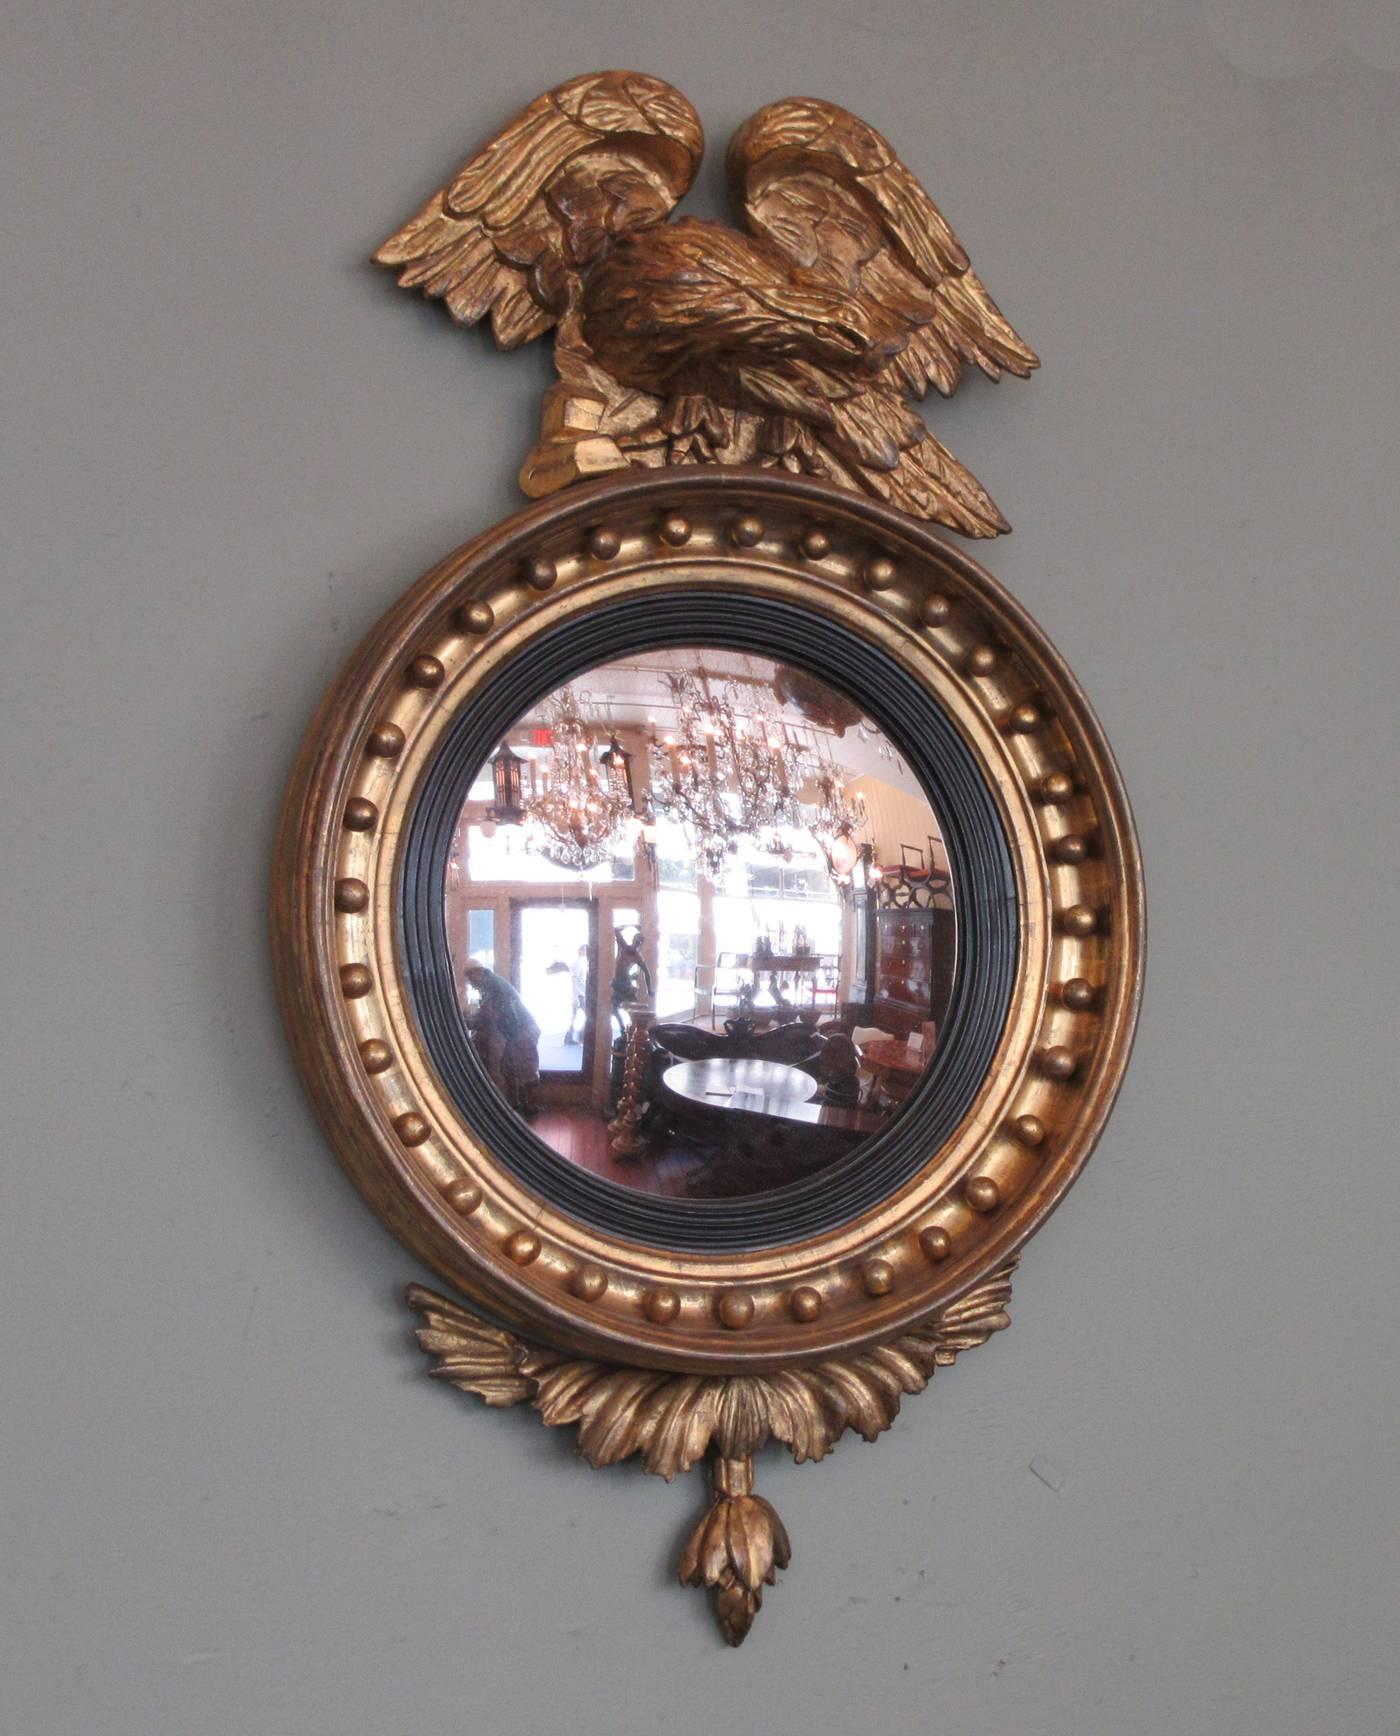 An early 19th century English Regency giltwood convex mirror, circa 1800, featuring displayed eagle, gilt balls and foliate carvings. The mirror is labeled by maker Thomas Fentham and retains its original convex mirror.  Thomas Fentham was a